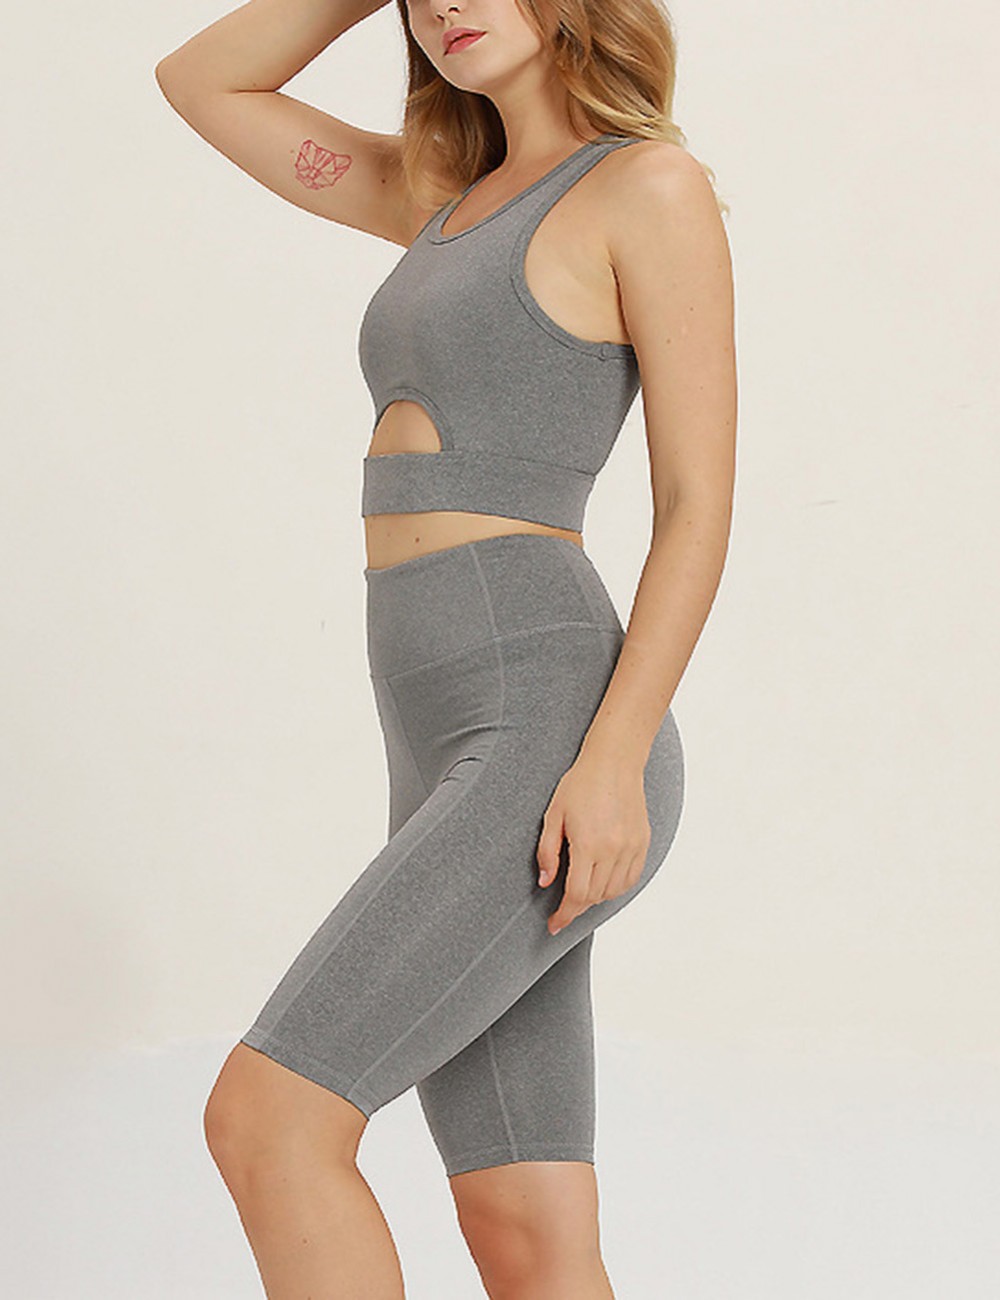 Smooth Grey Tank Top Scoop Cut Out Tight Shorts Yoga Suit Feminine